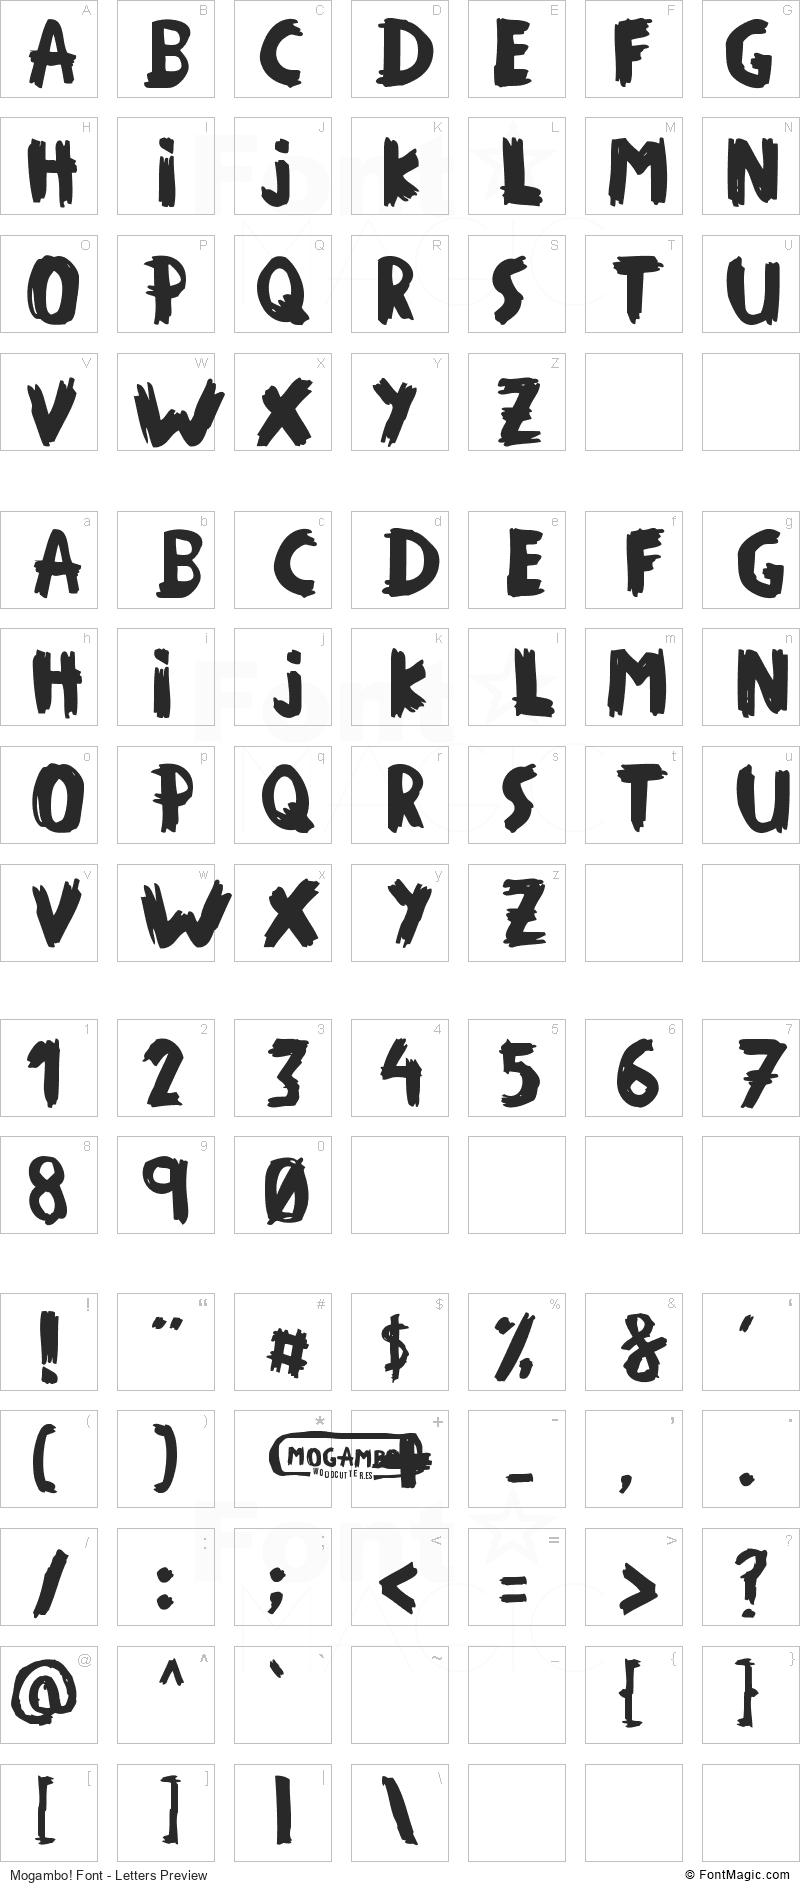 Mogambo! Font - All Latters Preview Chart